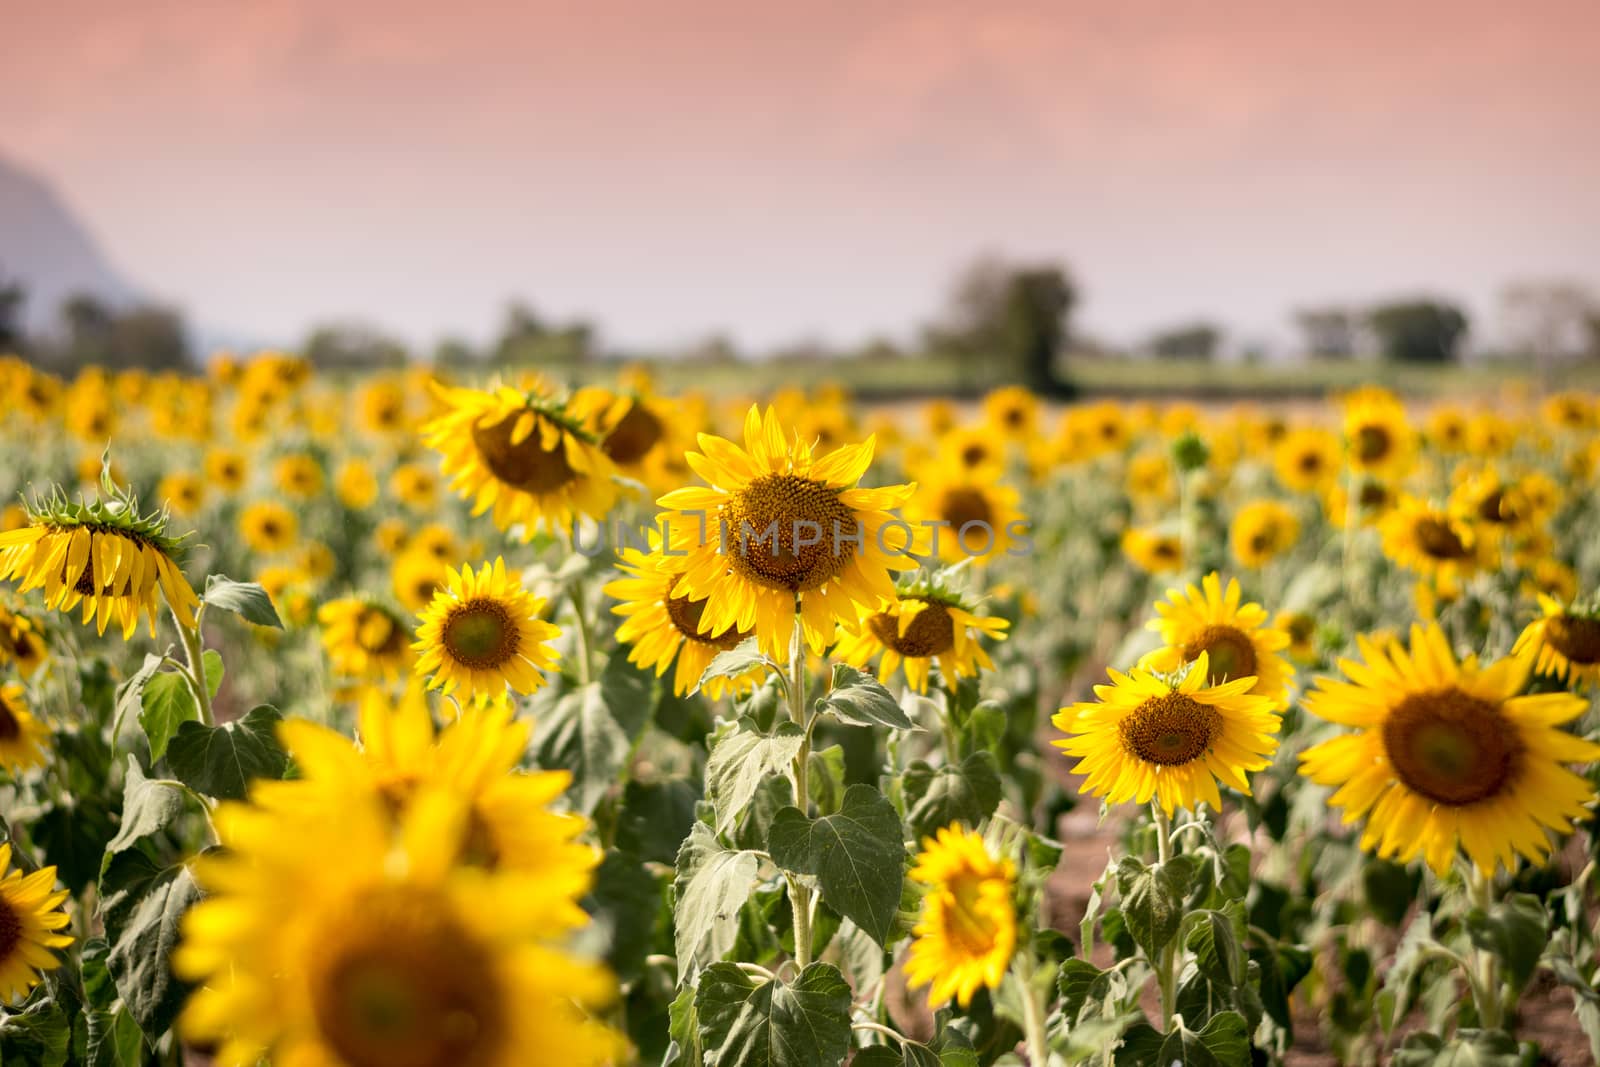 Field of sunflowers with blue sky. A sunflower field at sunset,w by dfrsce